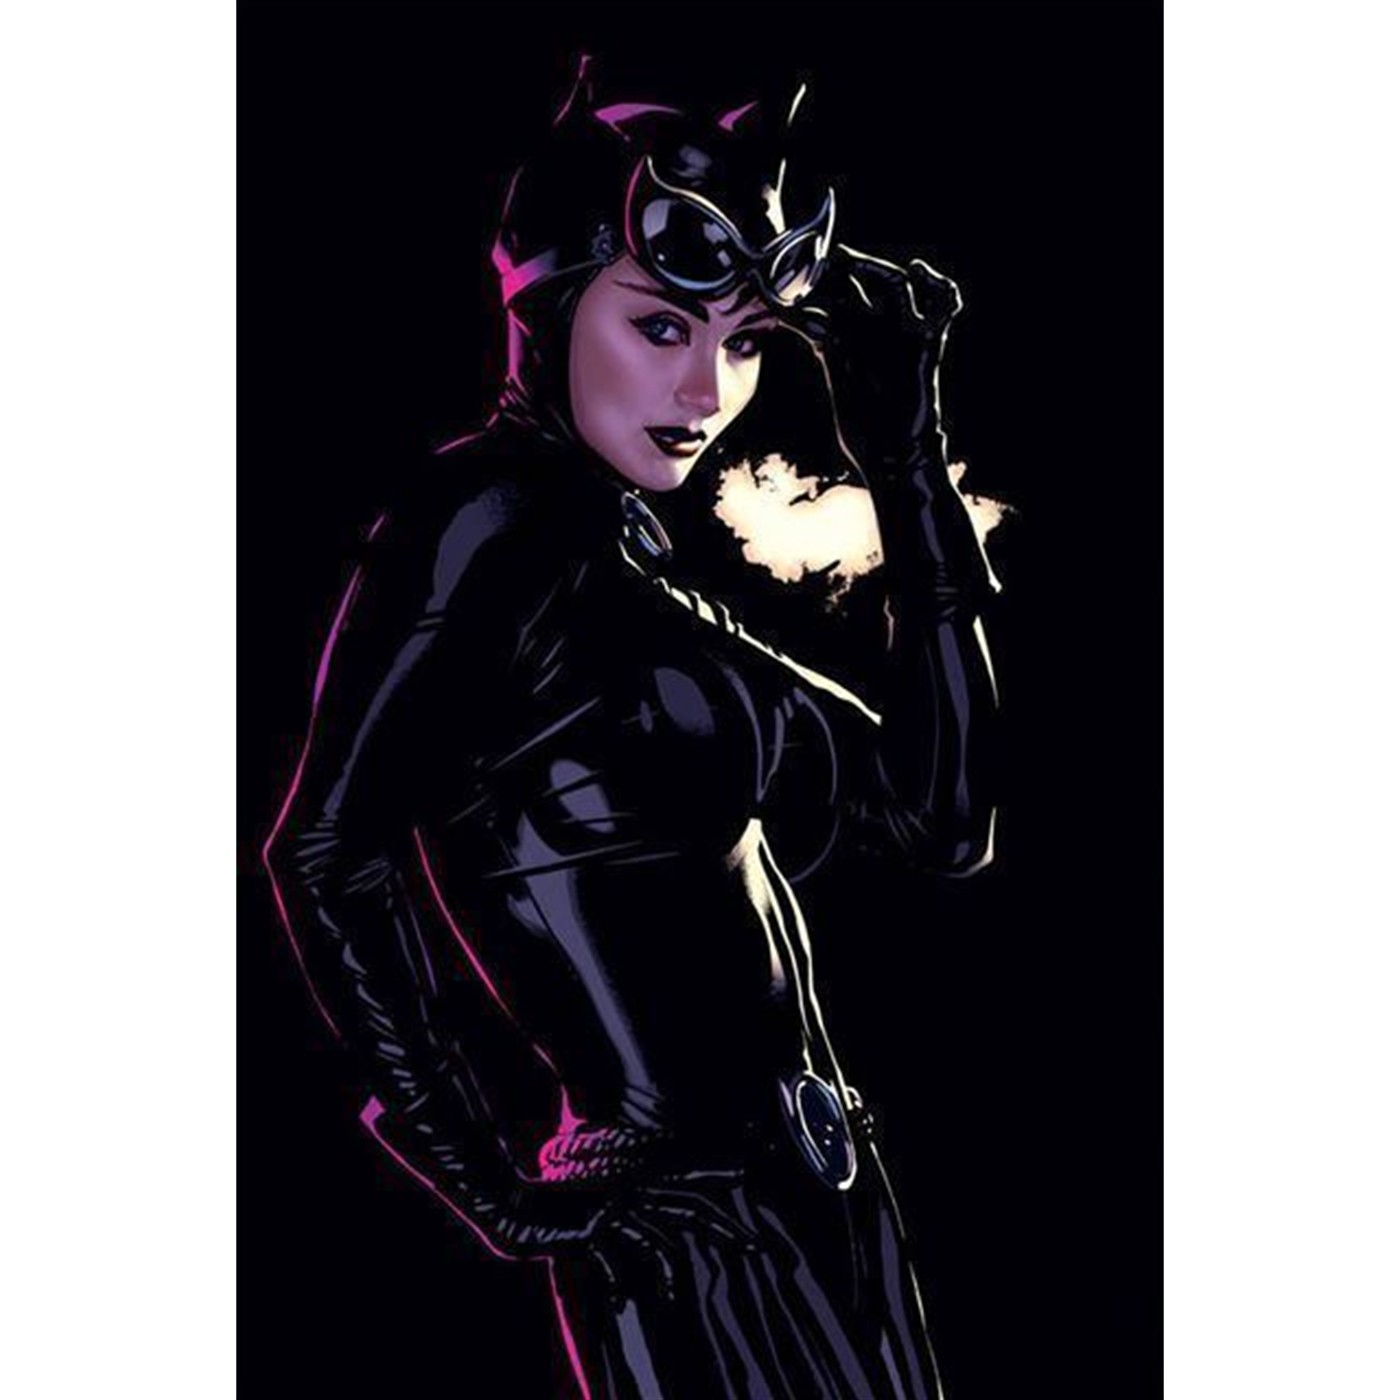 Catwoman Poster #46 by Adam Hughes